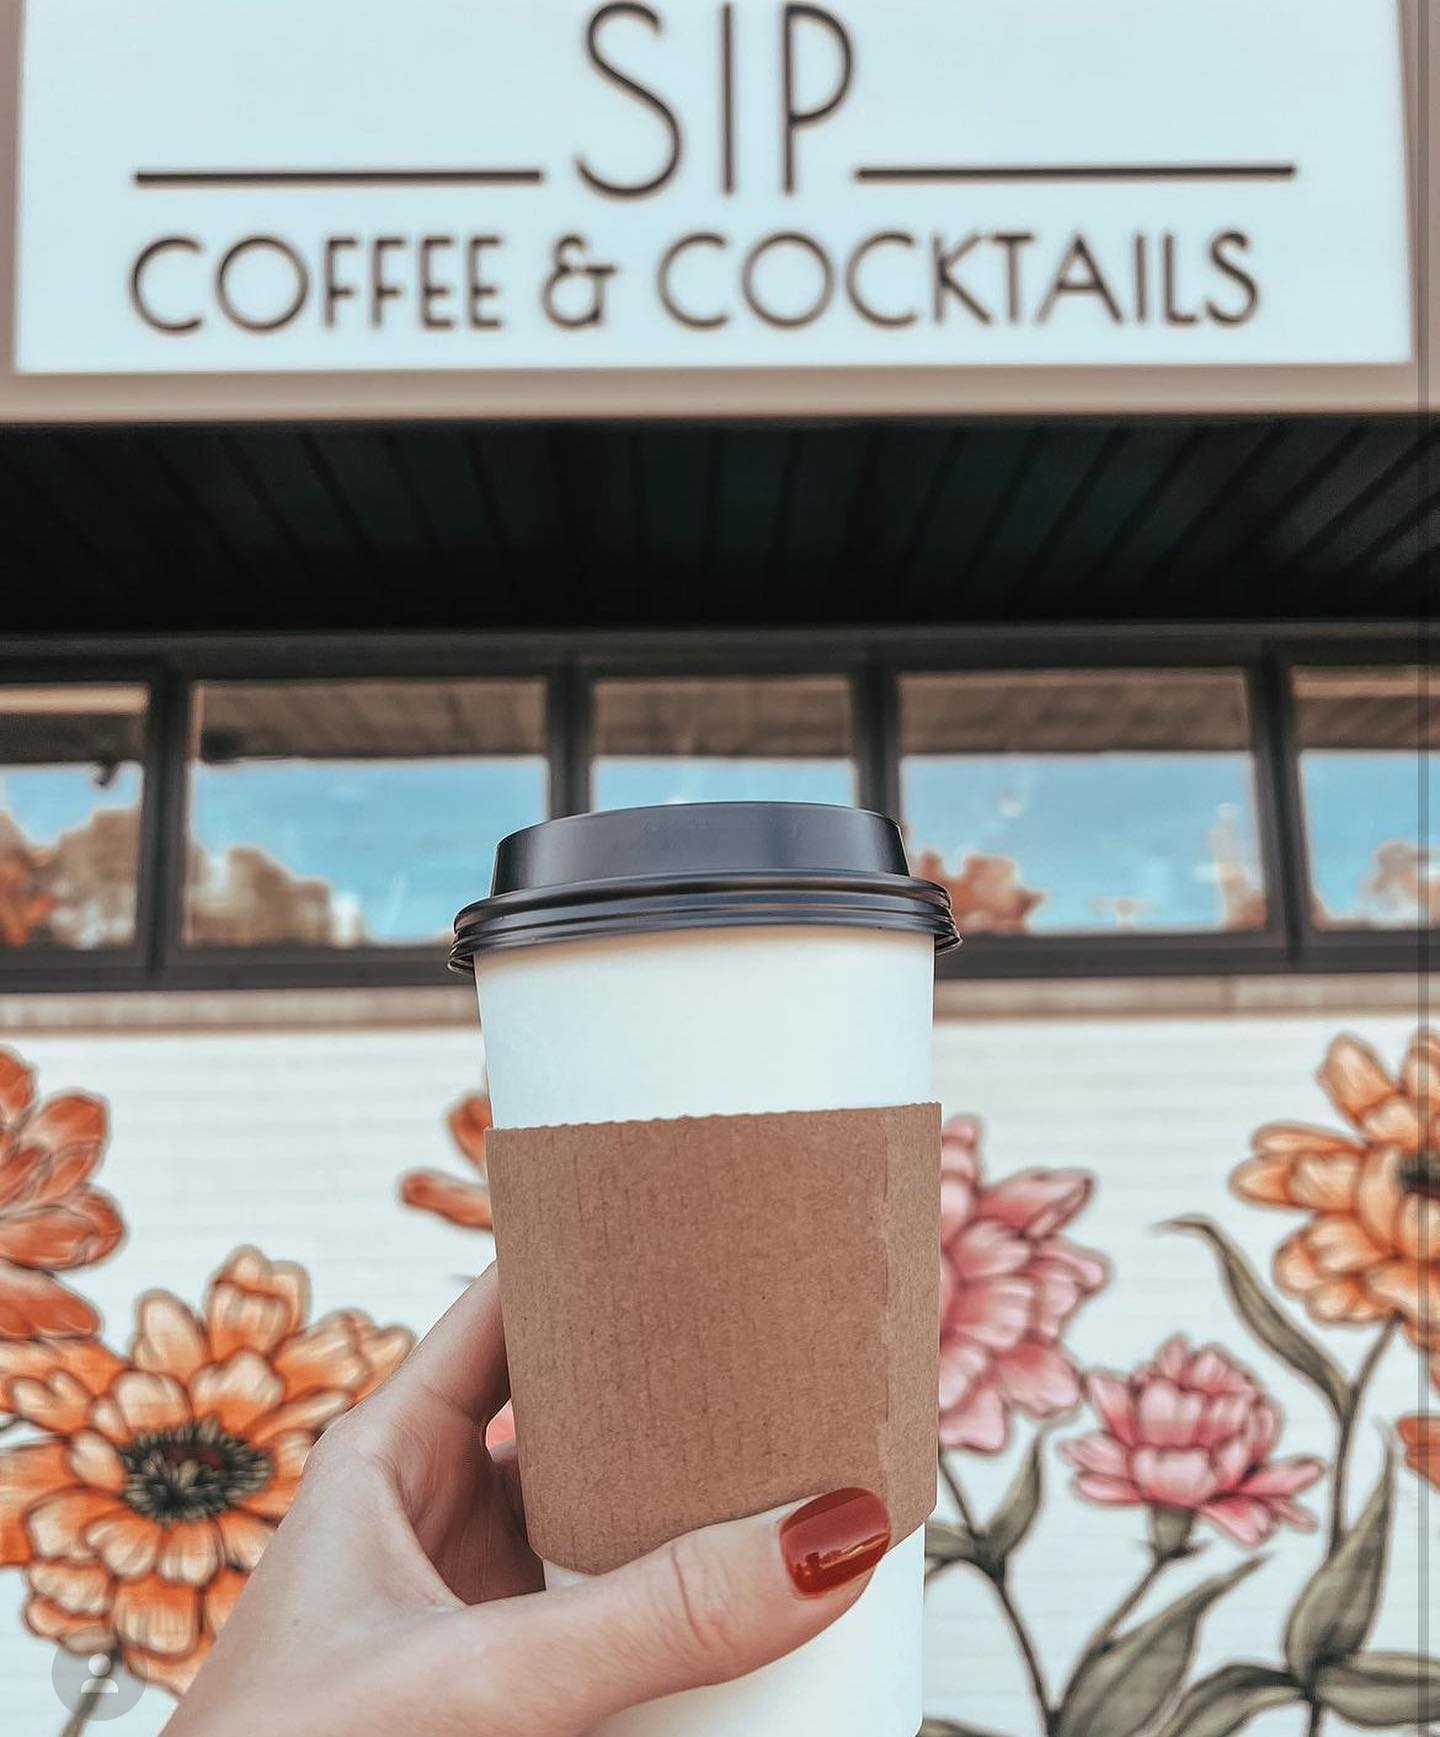 Sip-Coffee-and-Cocktails-is-one-of-the-new-coffee-shops-in-Grand-Rapids